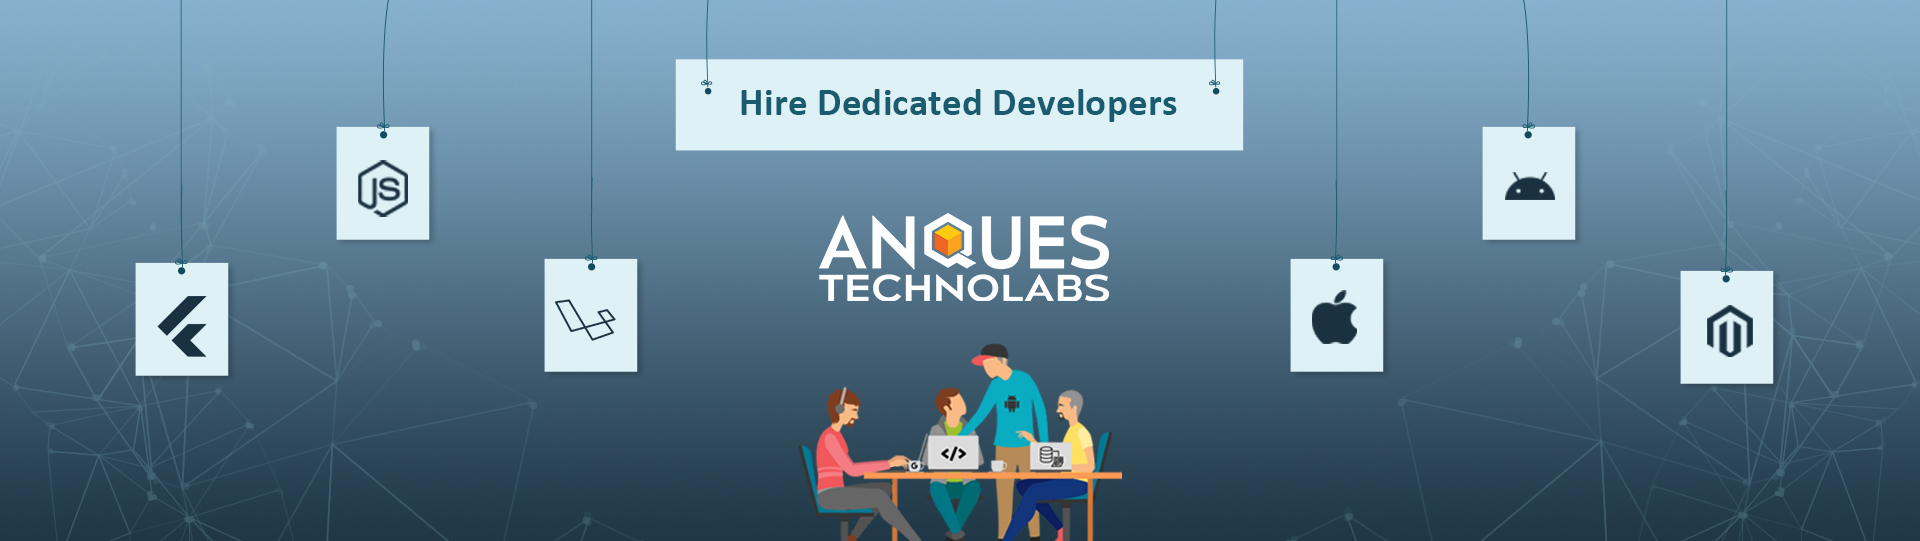 Hire-dedicated-developers | Anques technolab